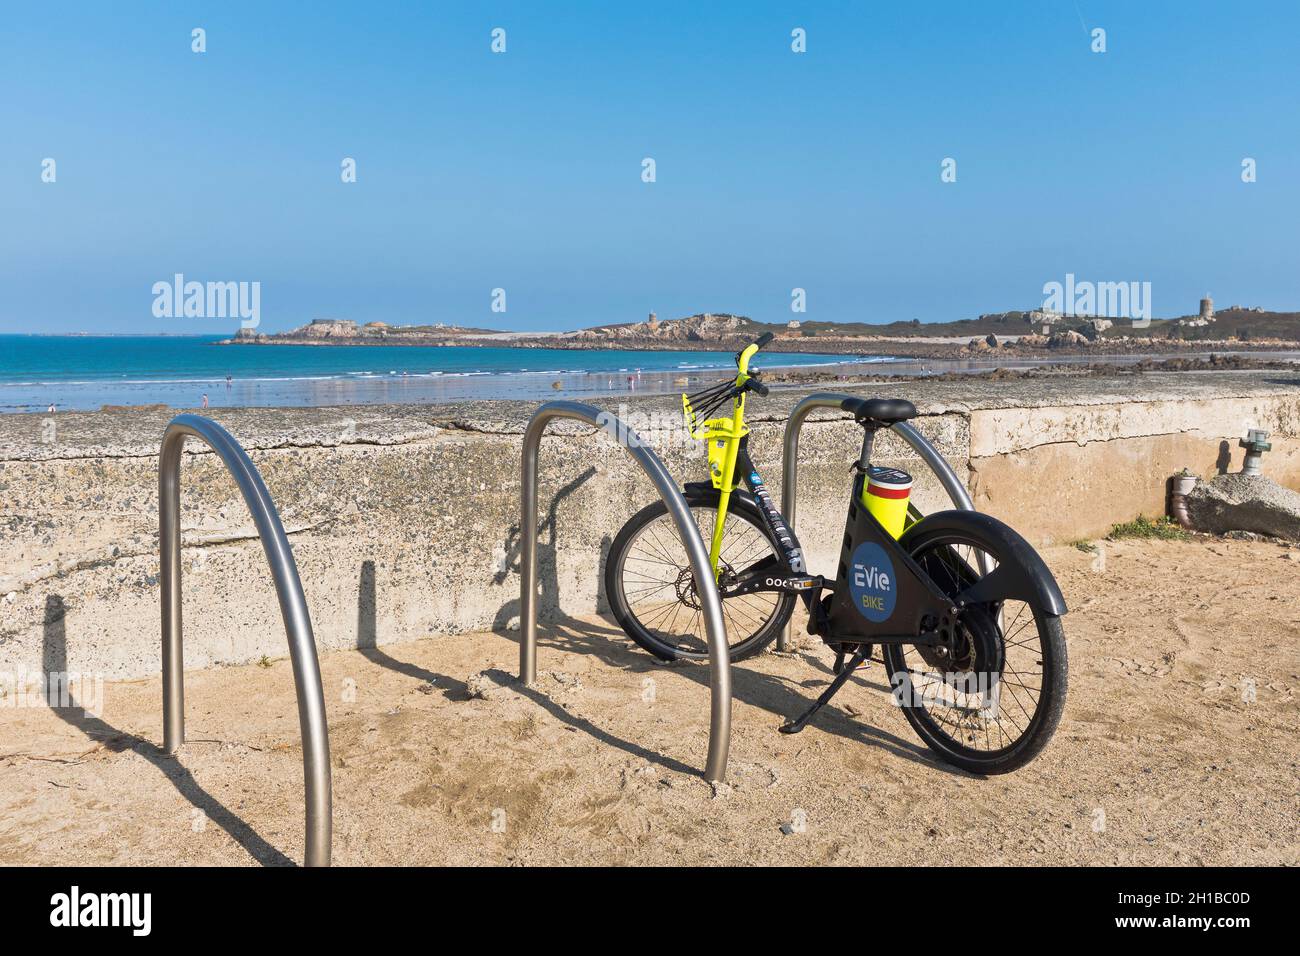 dh Evie Bike EBIKE GUERNSEY Electric bikes stand parked at beach Stock Photo